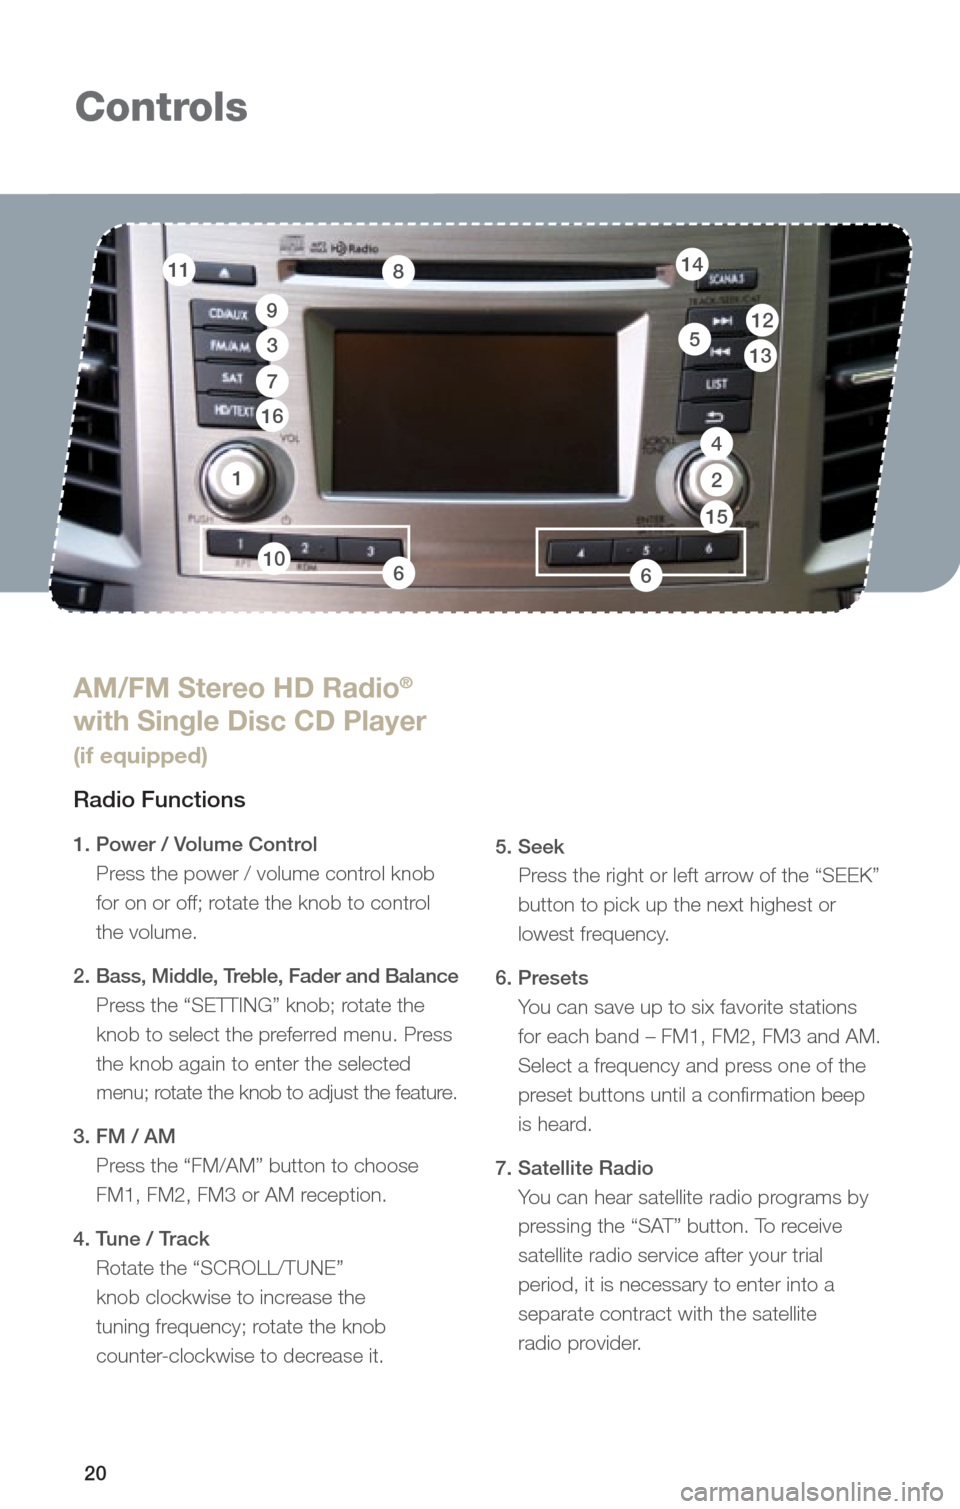 SUBARU OUTBACK 2013 5.G Quick Reference Guide 20
Controls
1
AM/FM Stereo HD Radio® 
with Single Disc CD Player 
(if equipped)
Radio Functions
1. Power / Volume Control 
Press the power / volume control knob  
for on or off; rotate the knob to co